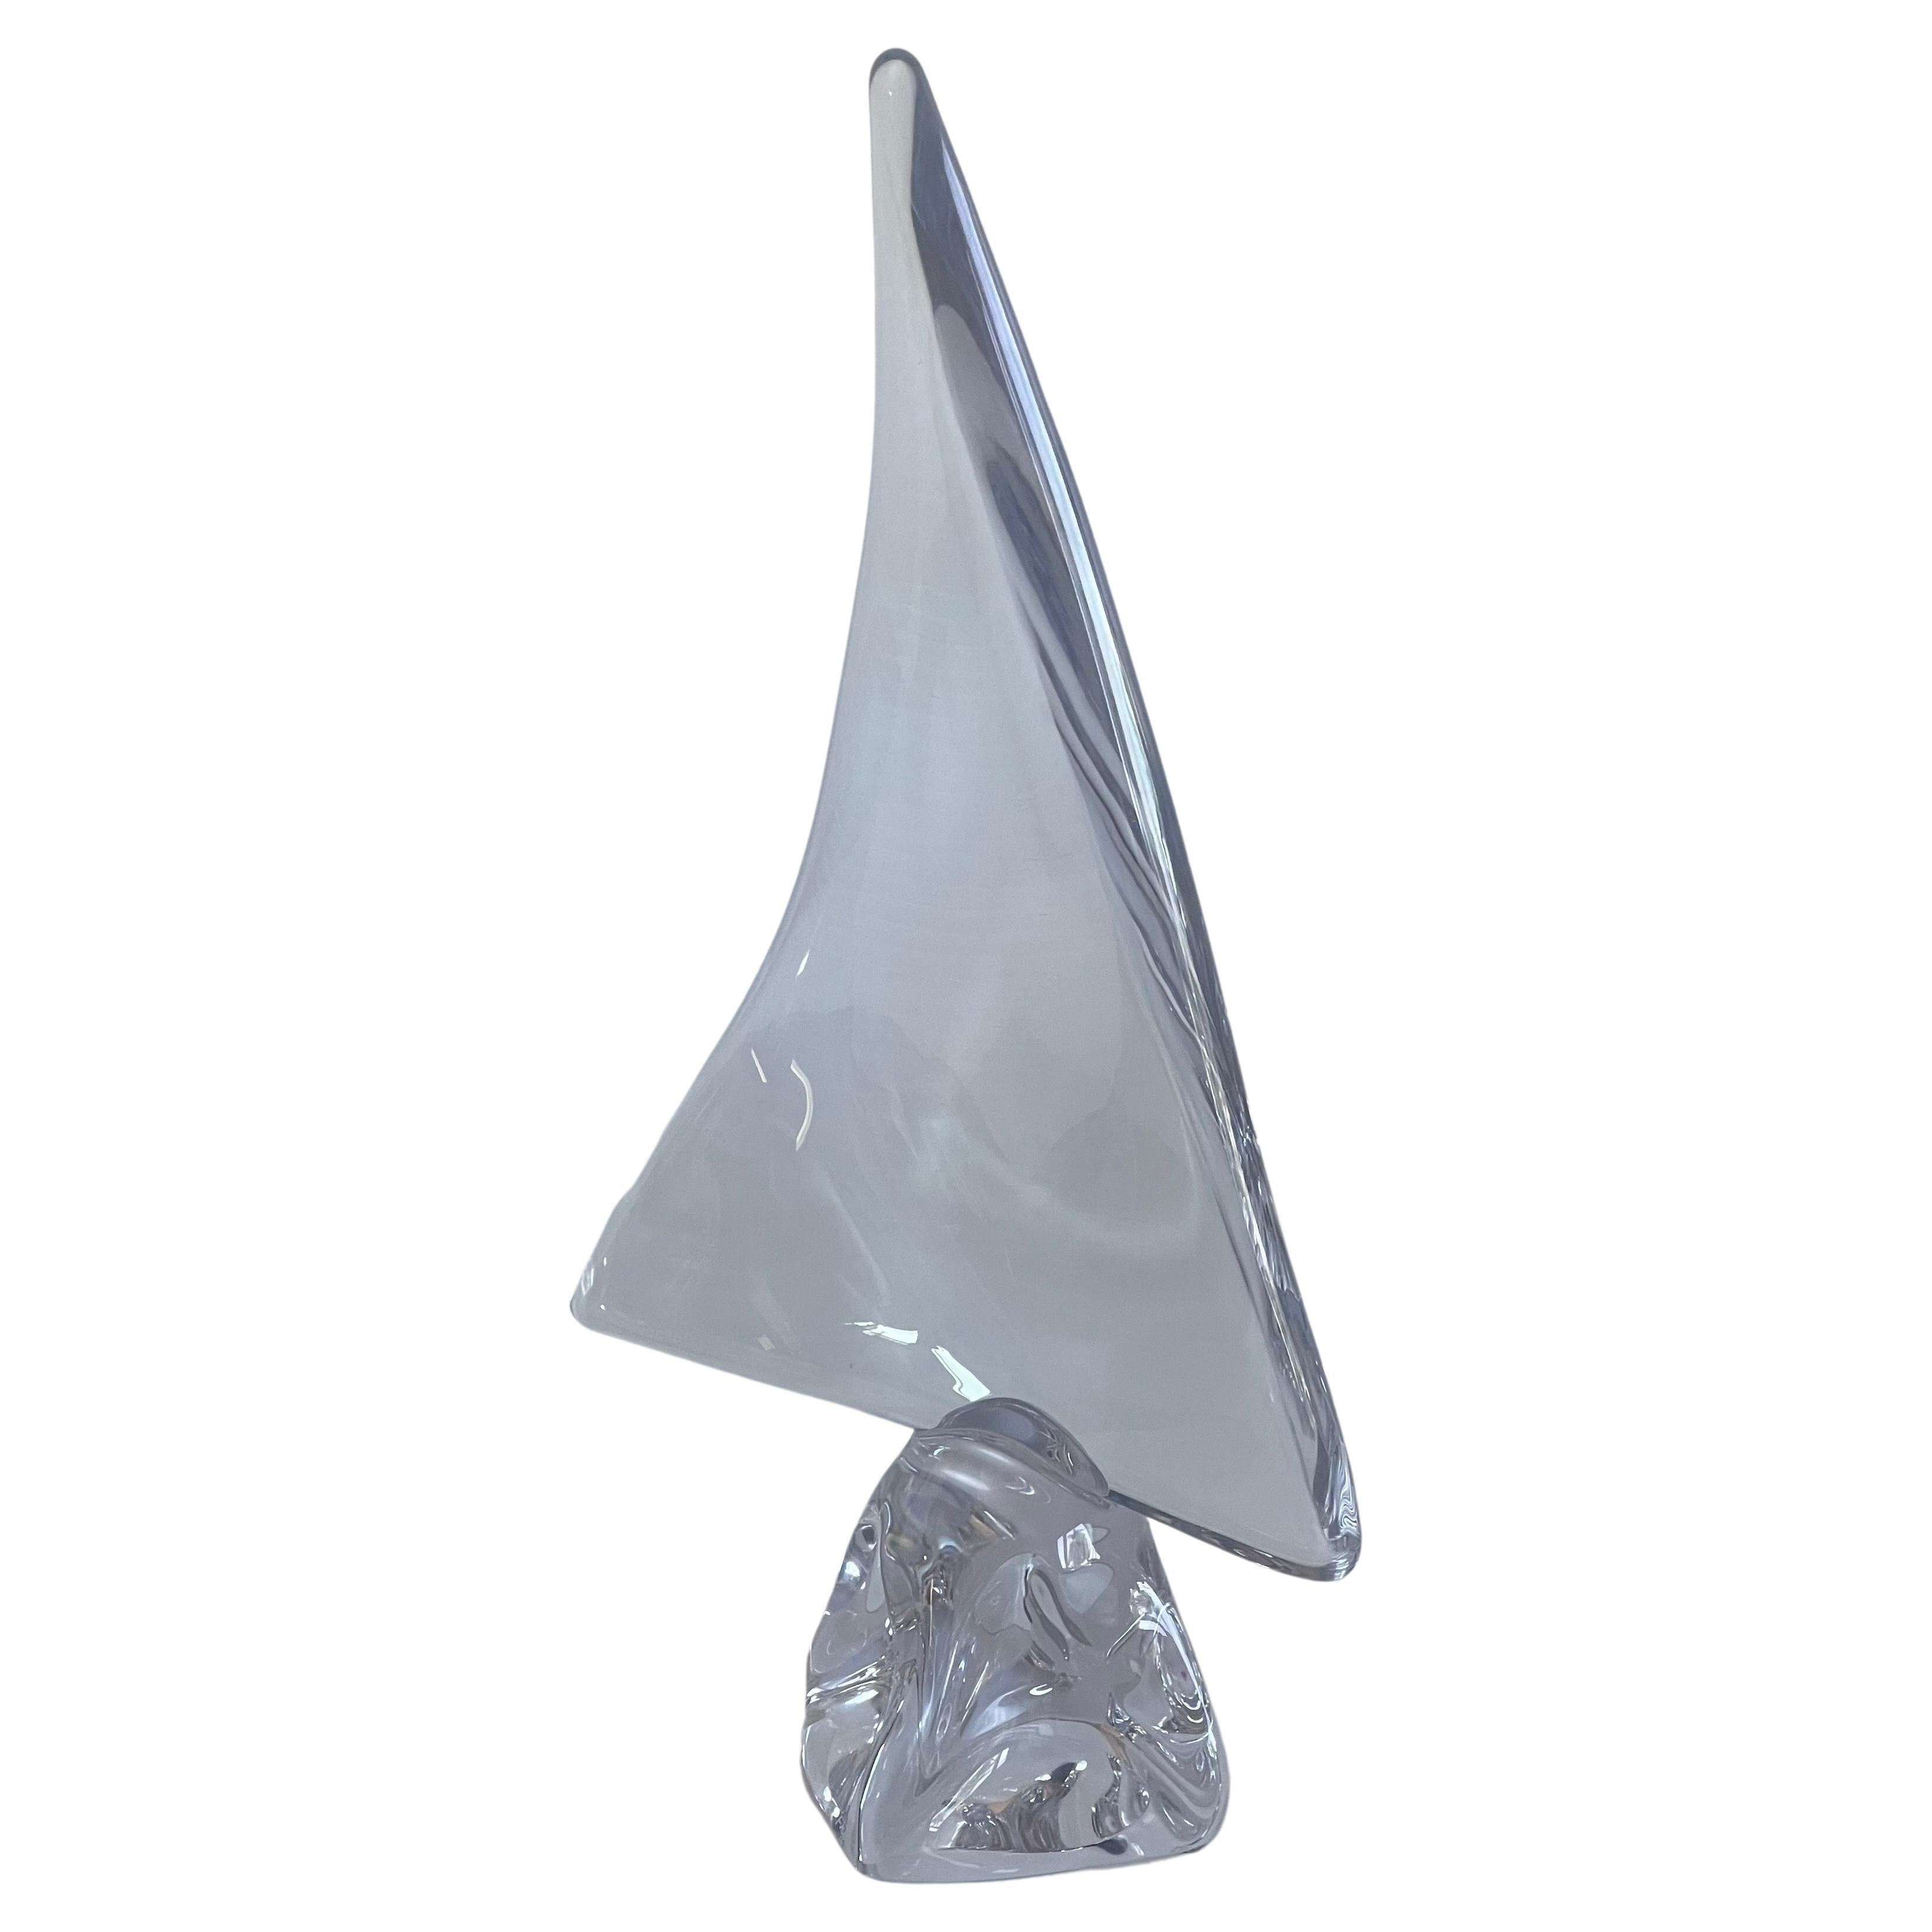 Large Crystal Sailboat Sculpture by Daum, France For Sale